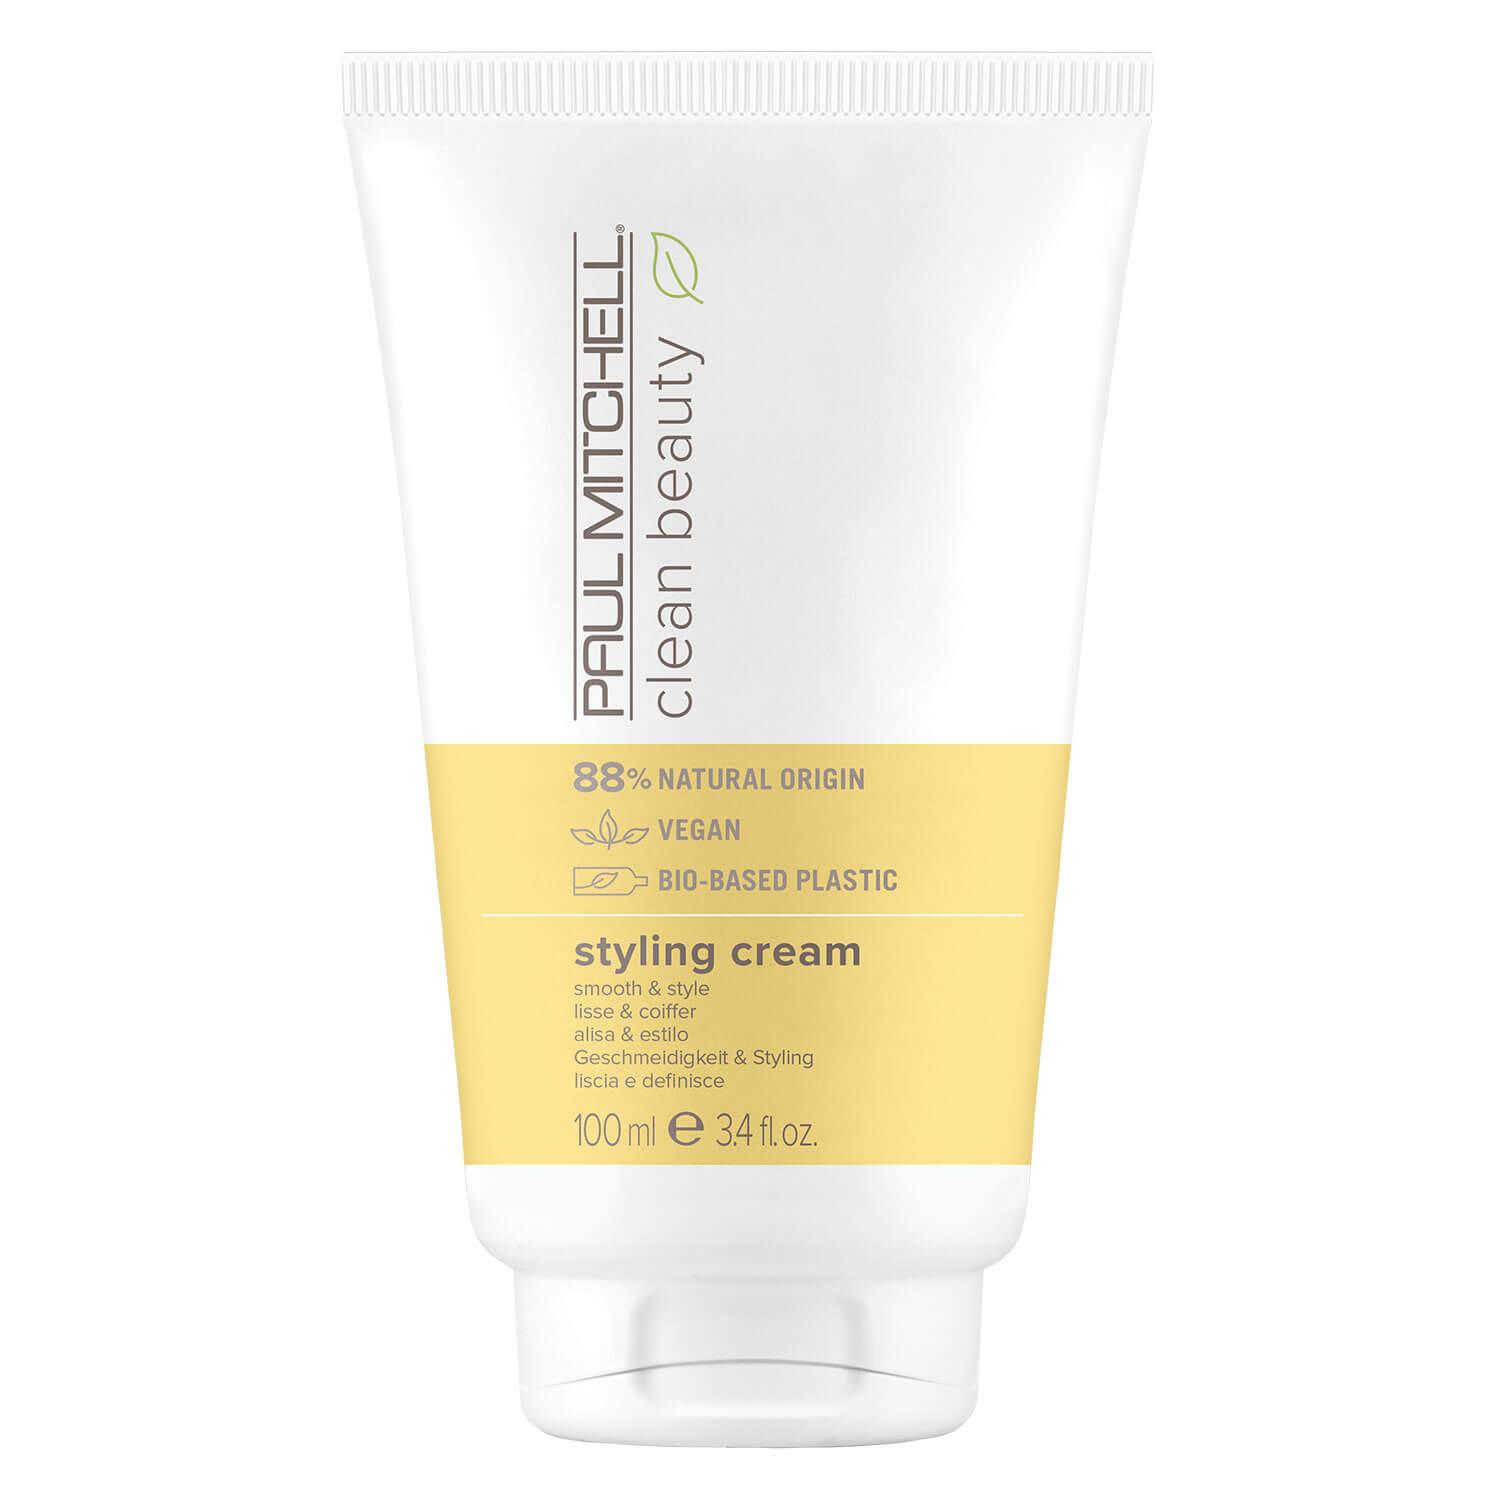 Paul Mitchell Clean Beauty - Styling Cream